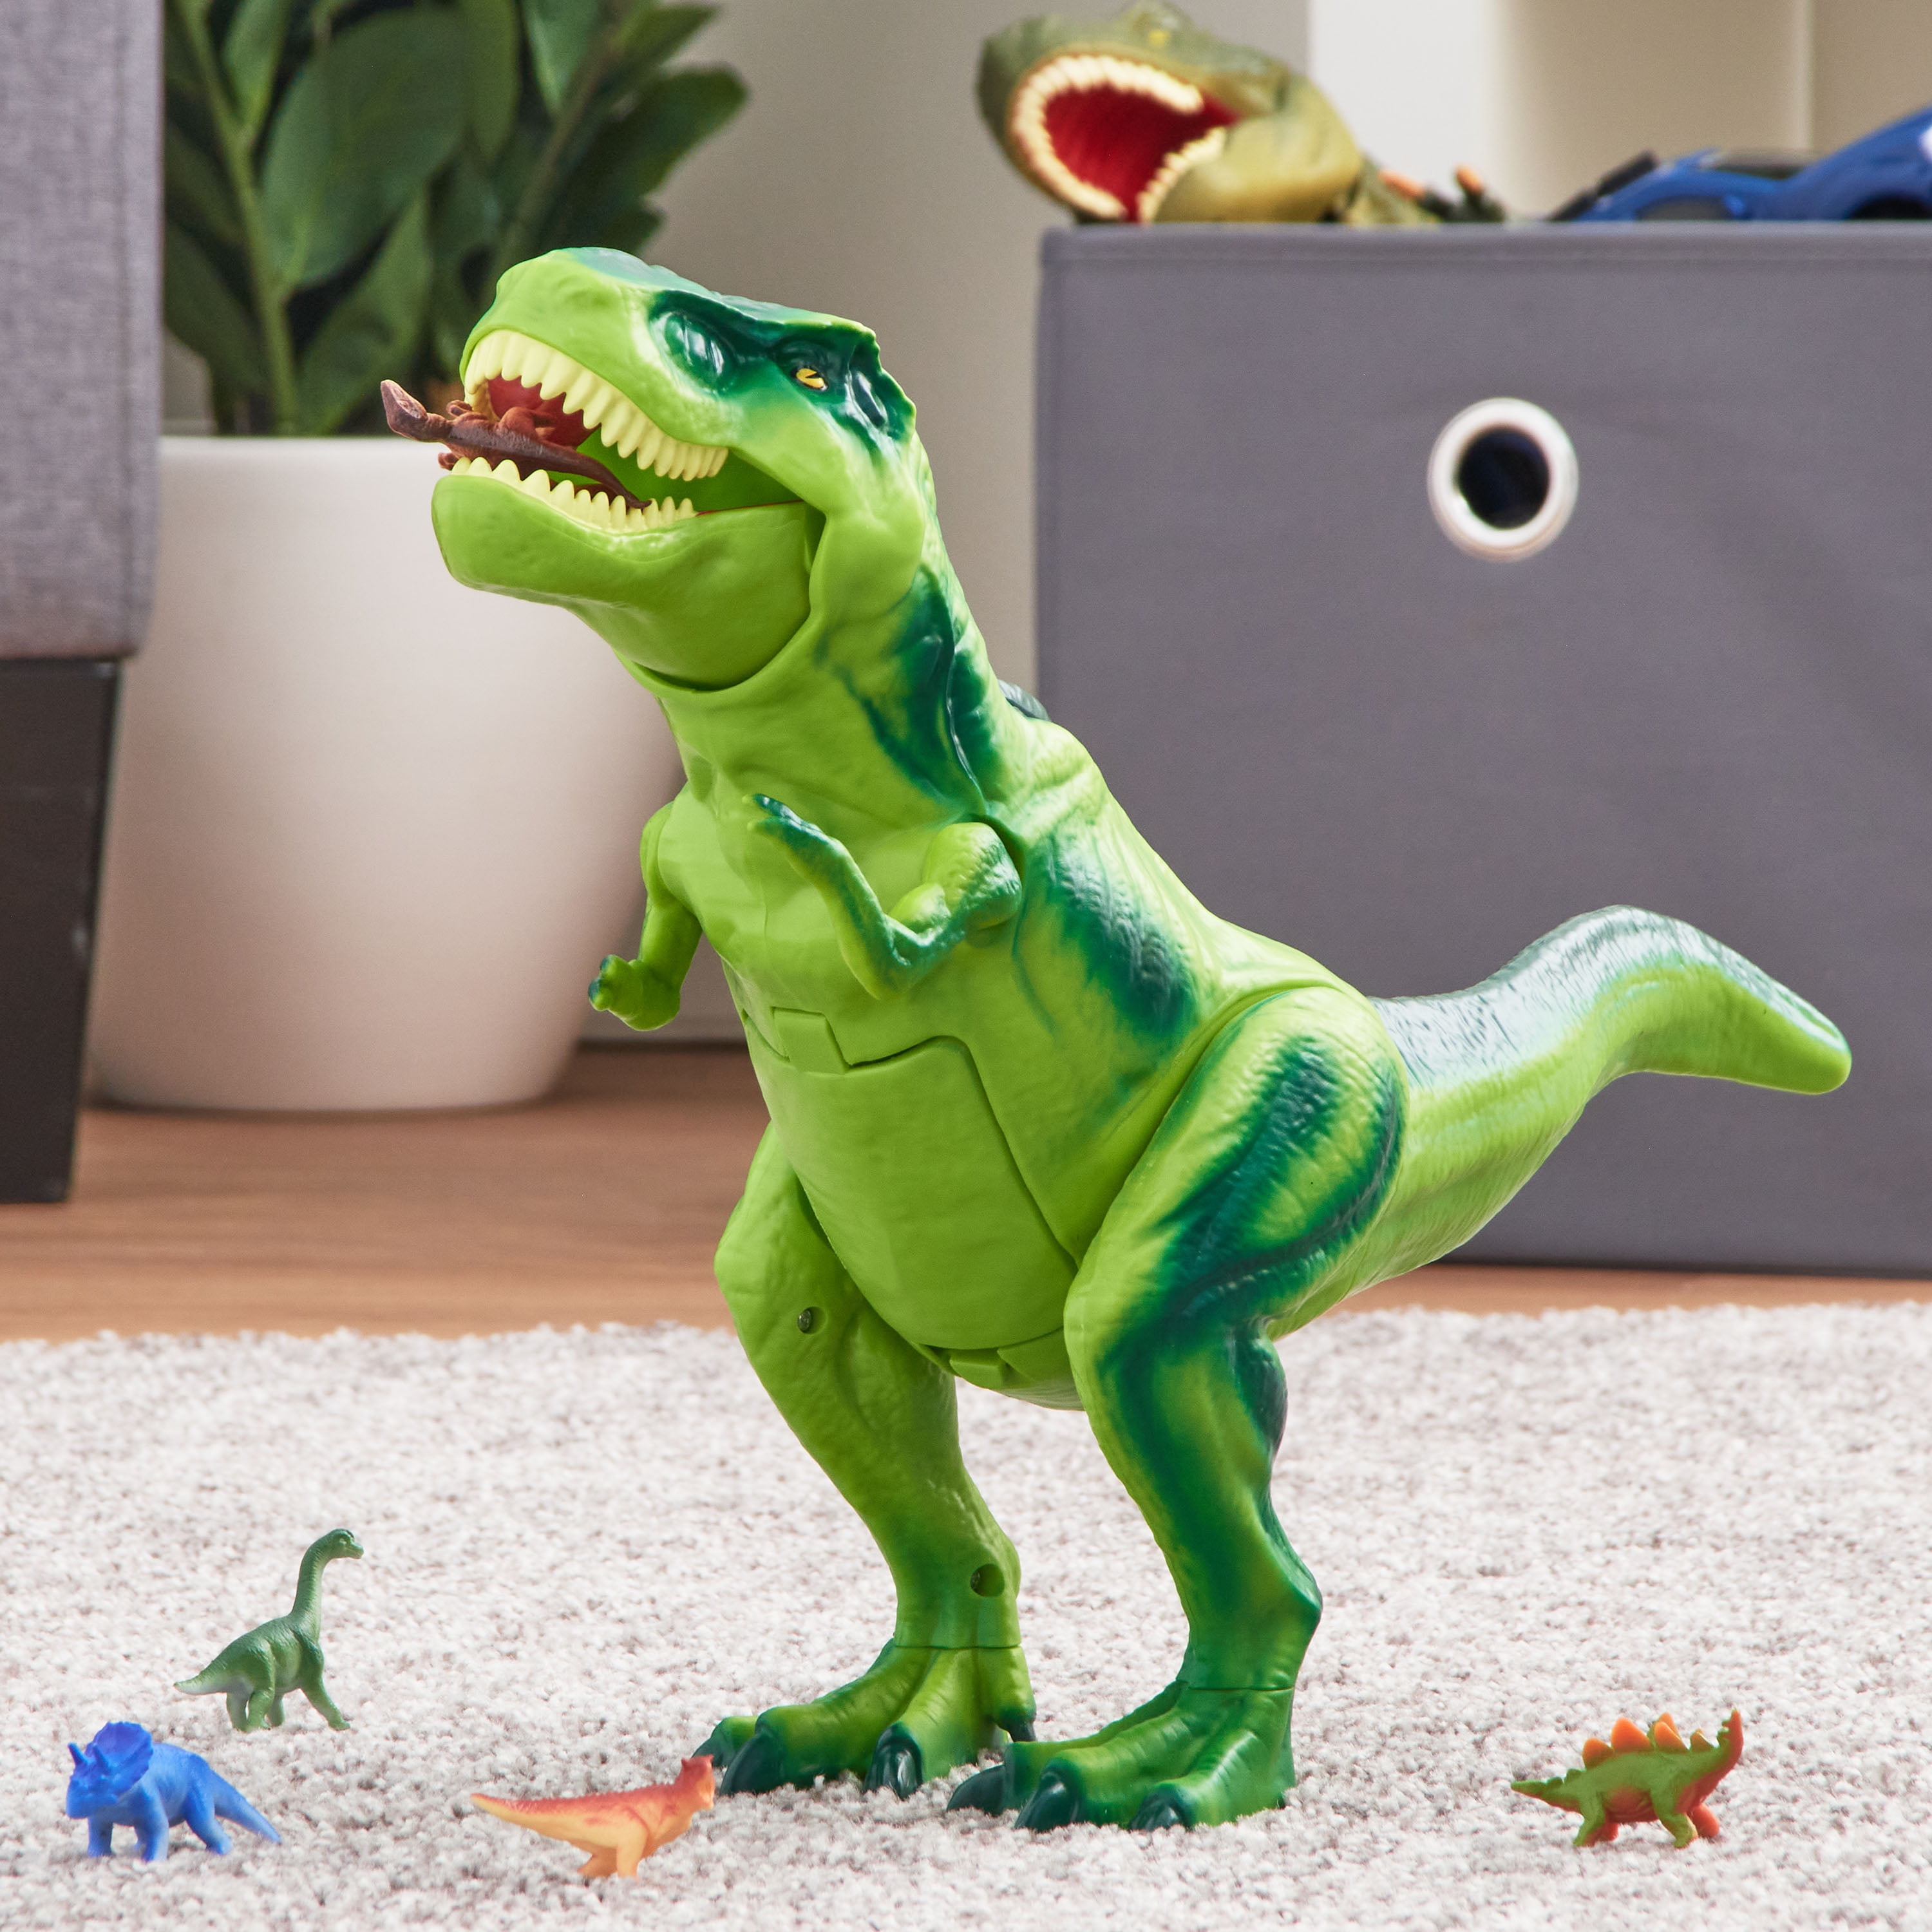 A Little Dino Frozen Trail ULTRA - The Baby Pet Dinosaur Game for Kids by  Sudden Rush Games, LLC